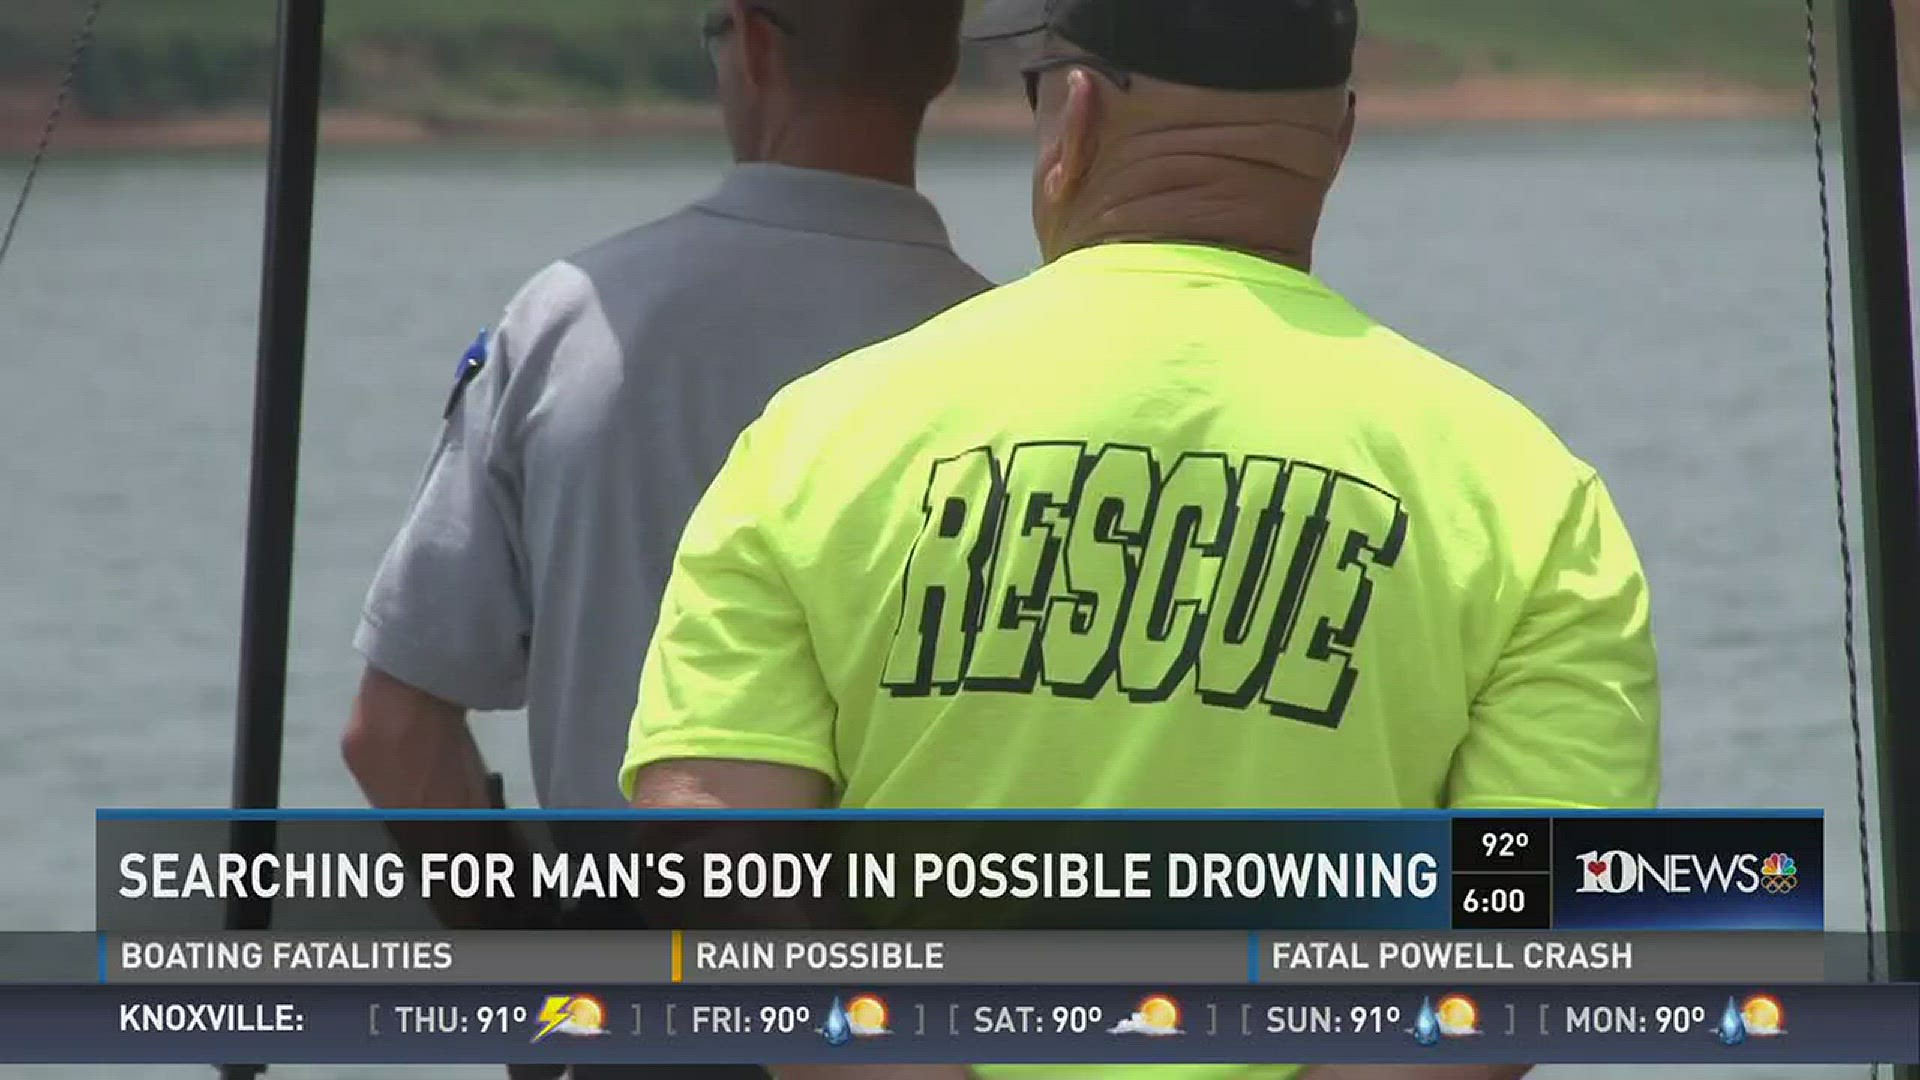 Dozens are searching for the body of a 76 year old man who drowned on Douglass Lake. In 2014 17 people died of boating fatalities in East TN. 6/22/16